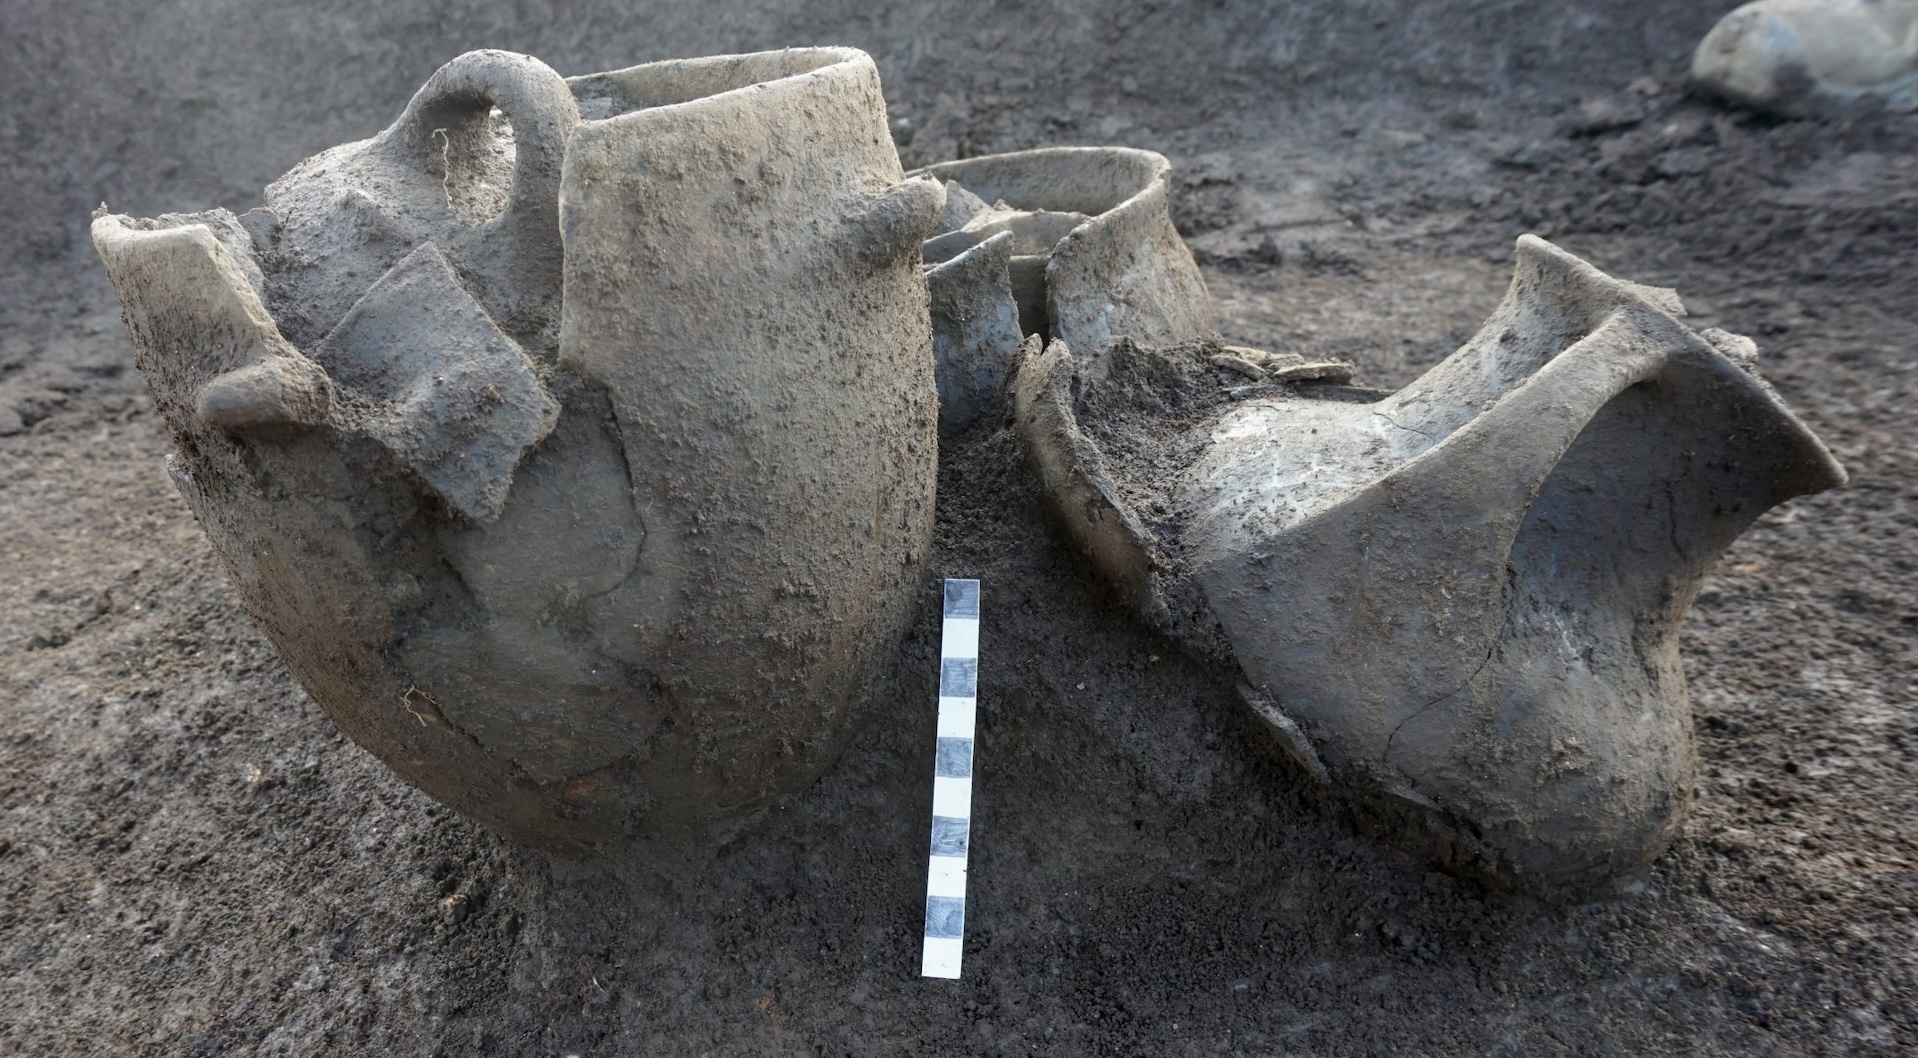 Jugs and vases found at the site.